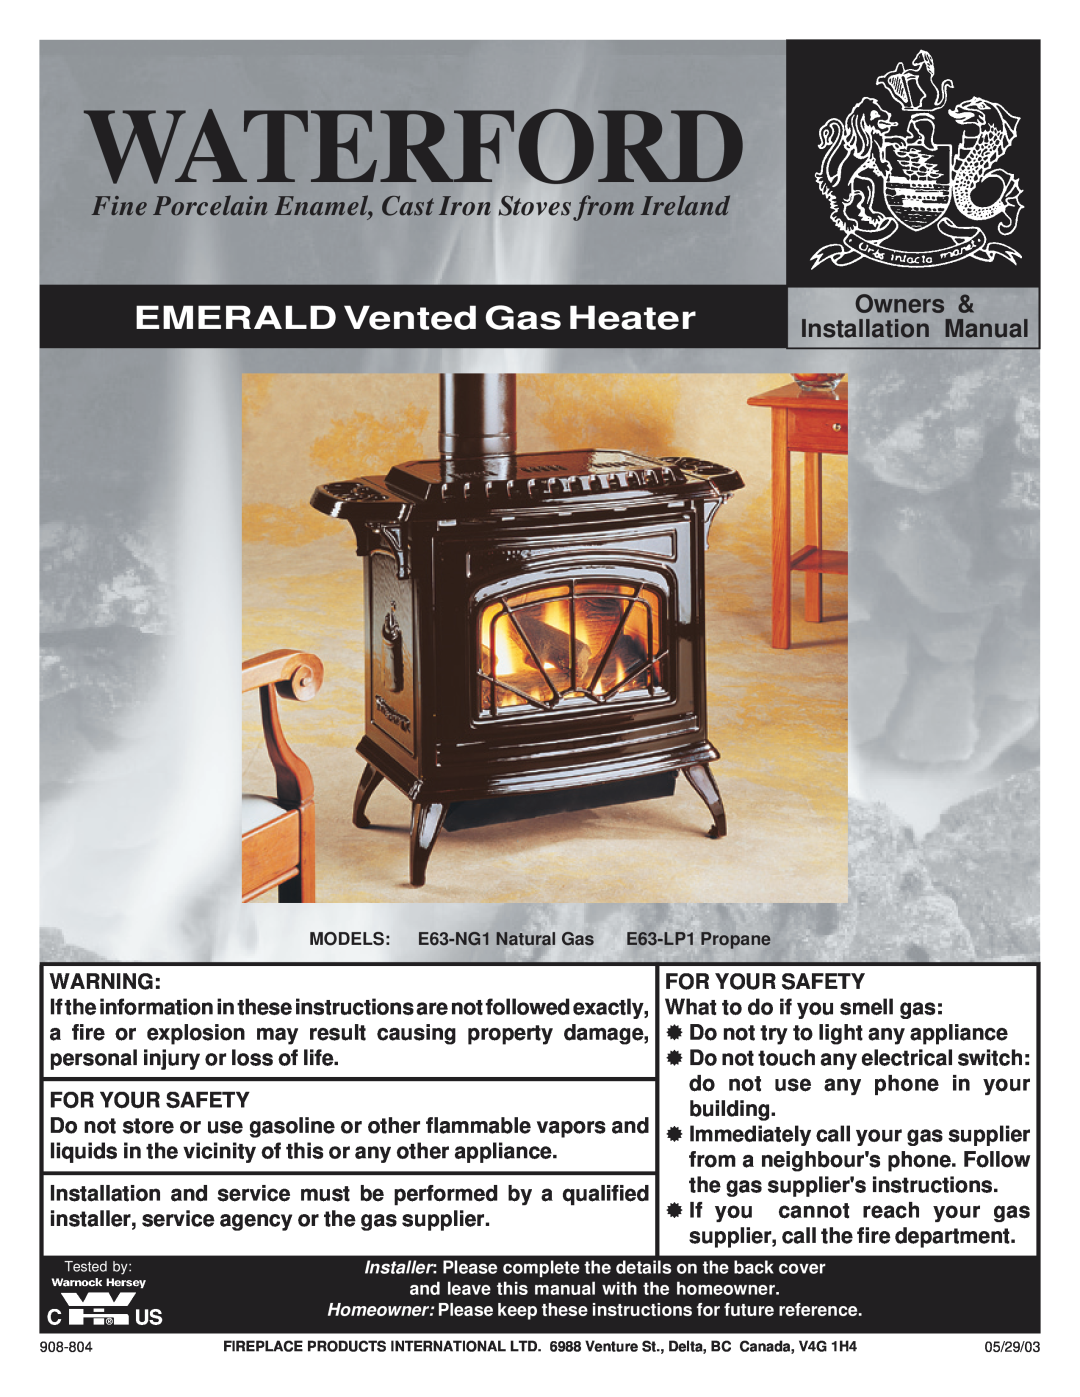 Waterford Appliances E63-NG1 installation manual Waterford, EMERALD Vented Gas Heater, Owners & Installation Manual 